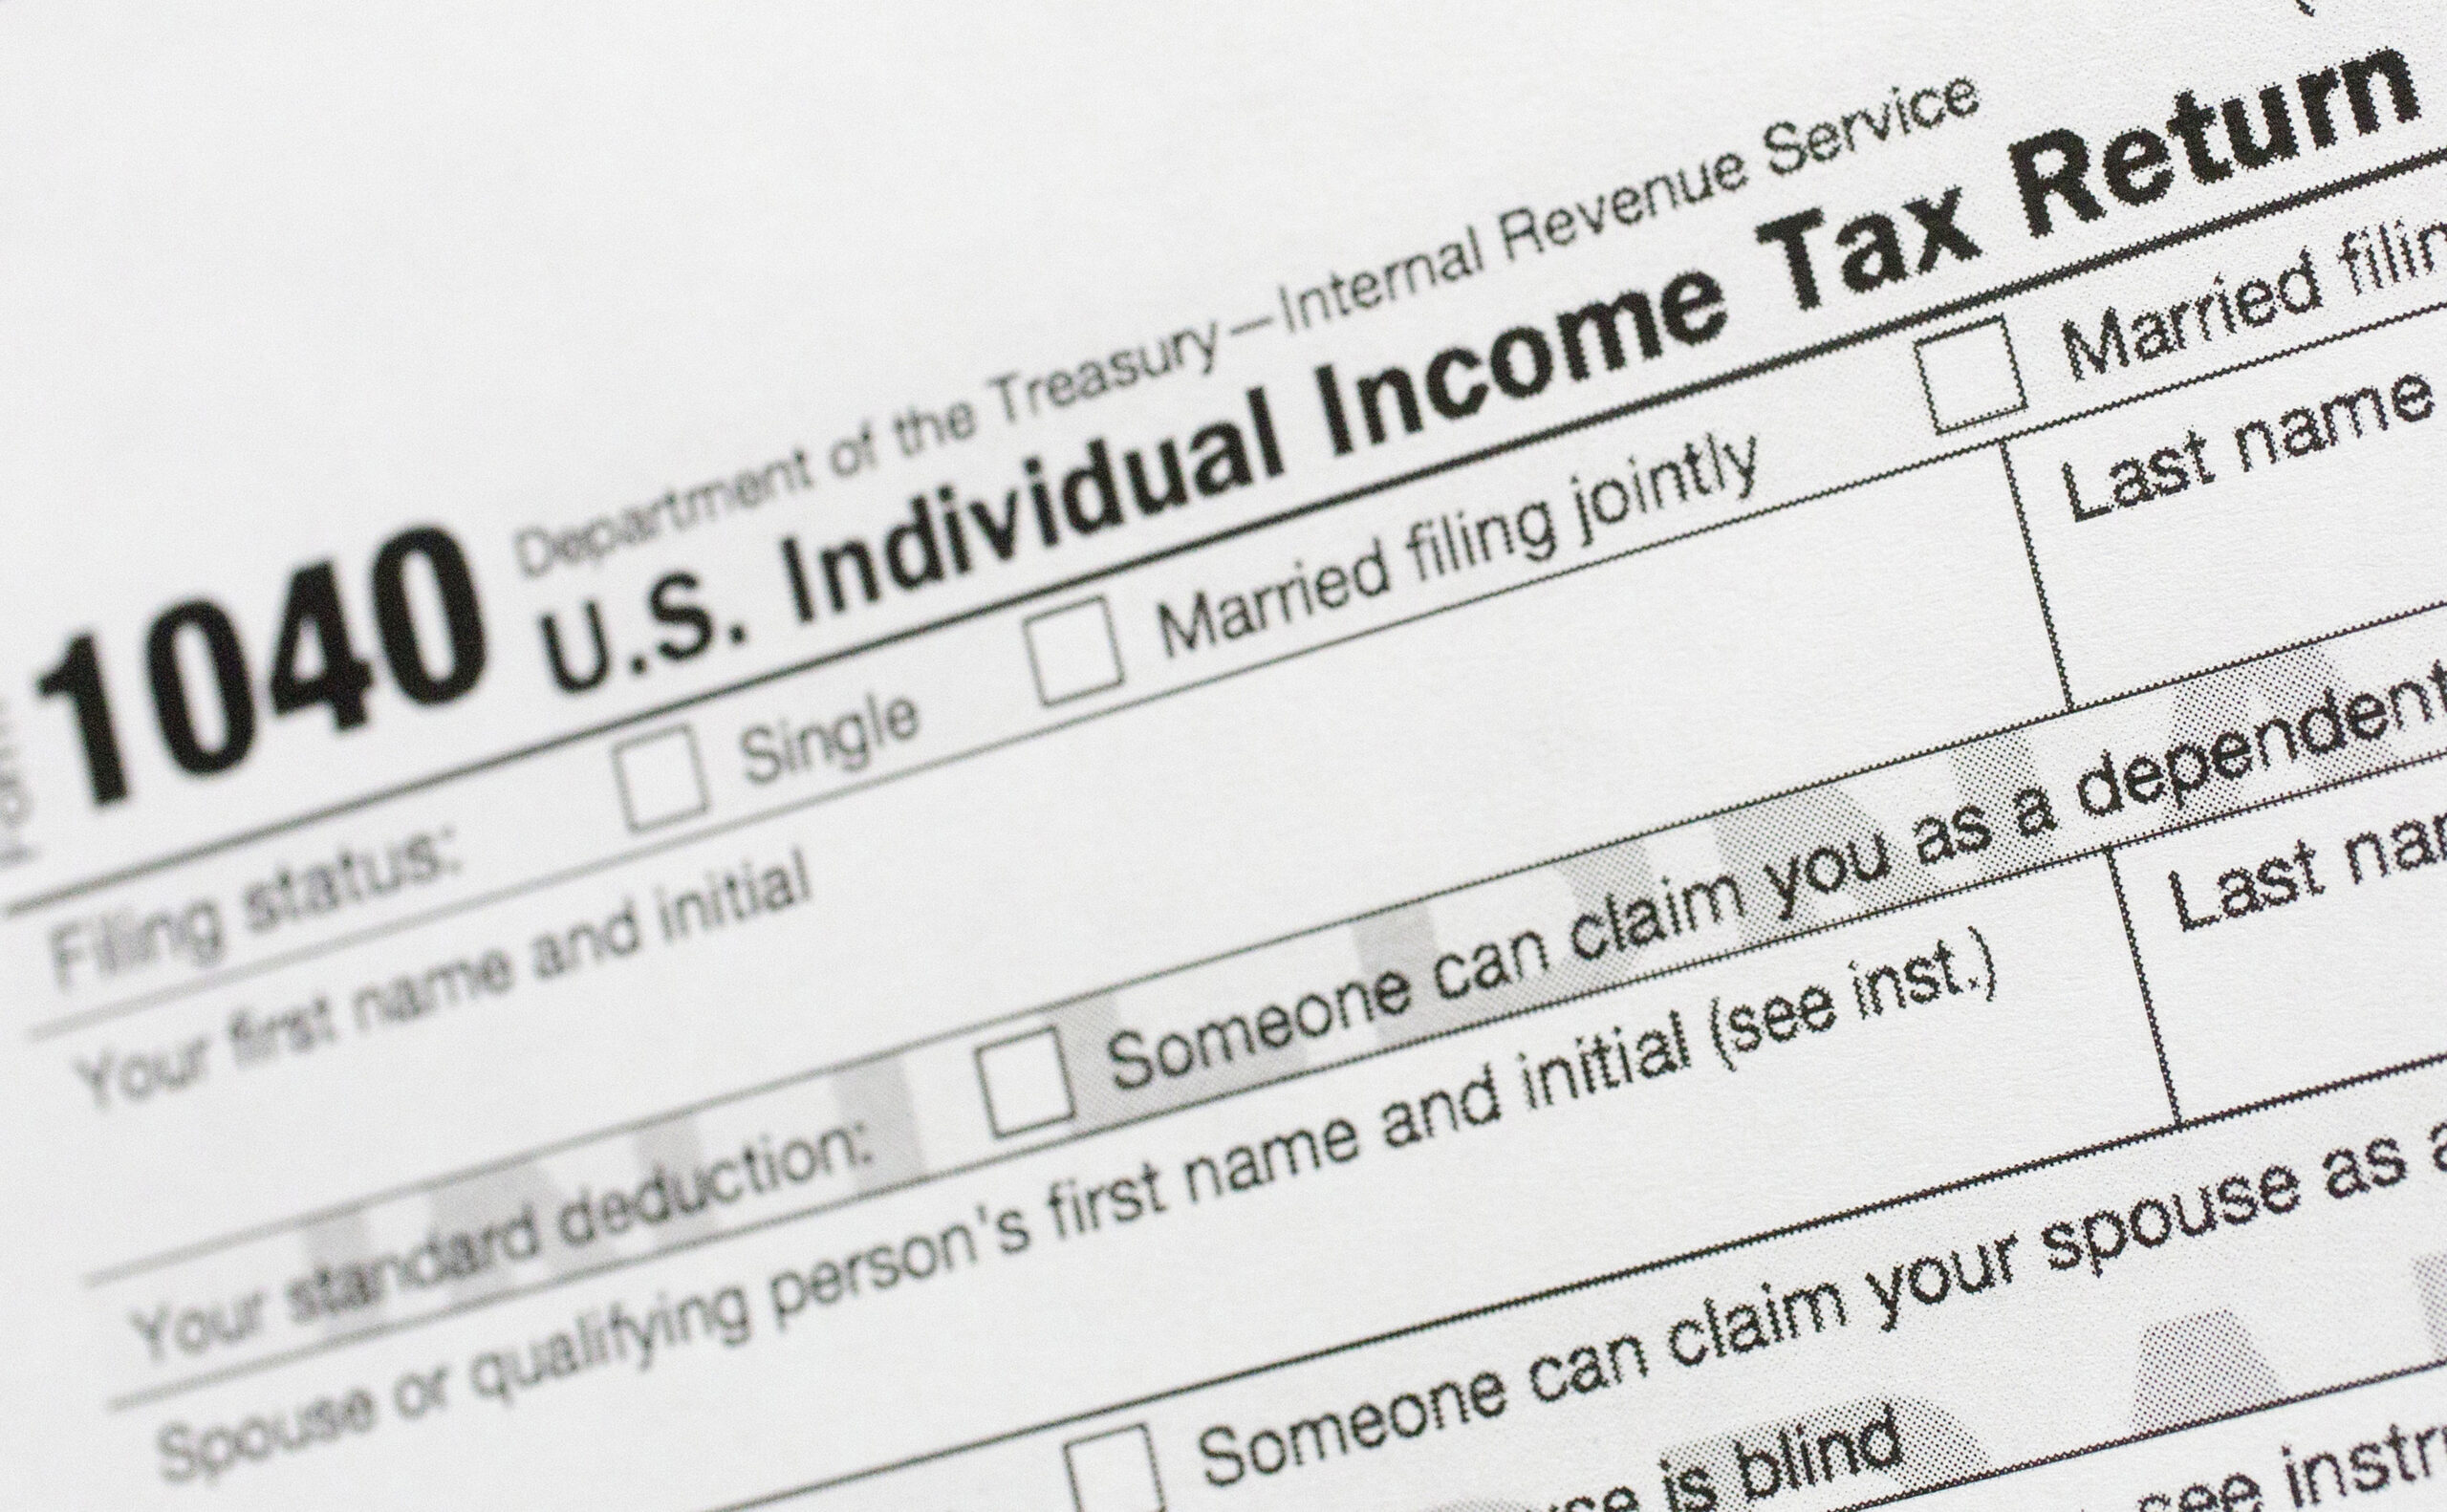 FILE - A portion of the 1040 U.S. Individual Income Tax Return form is shown July 24, 2018, in New ...